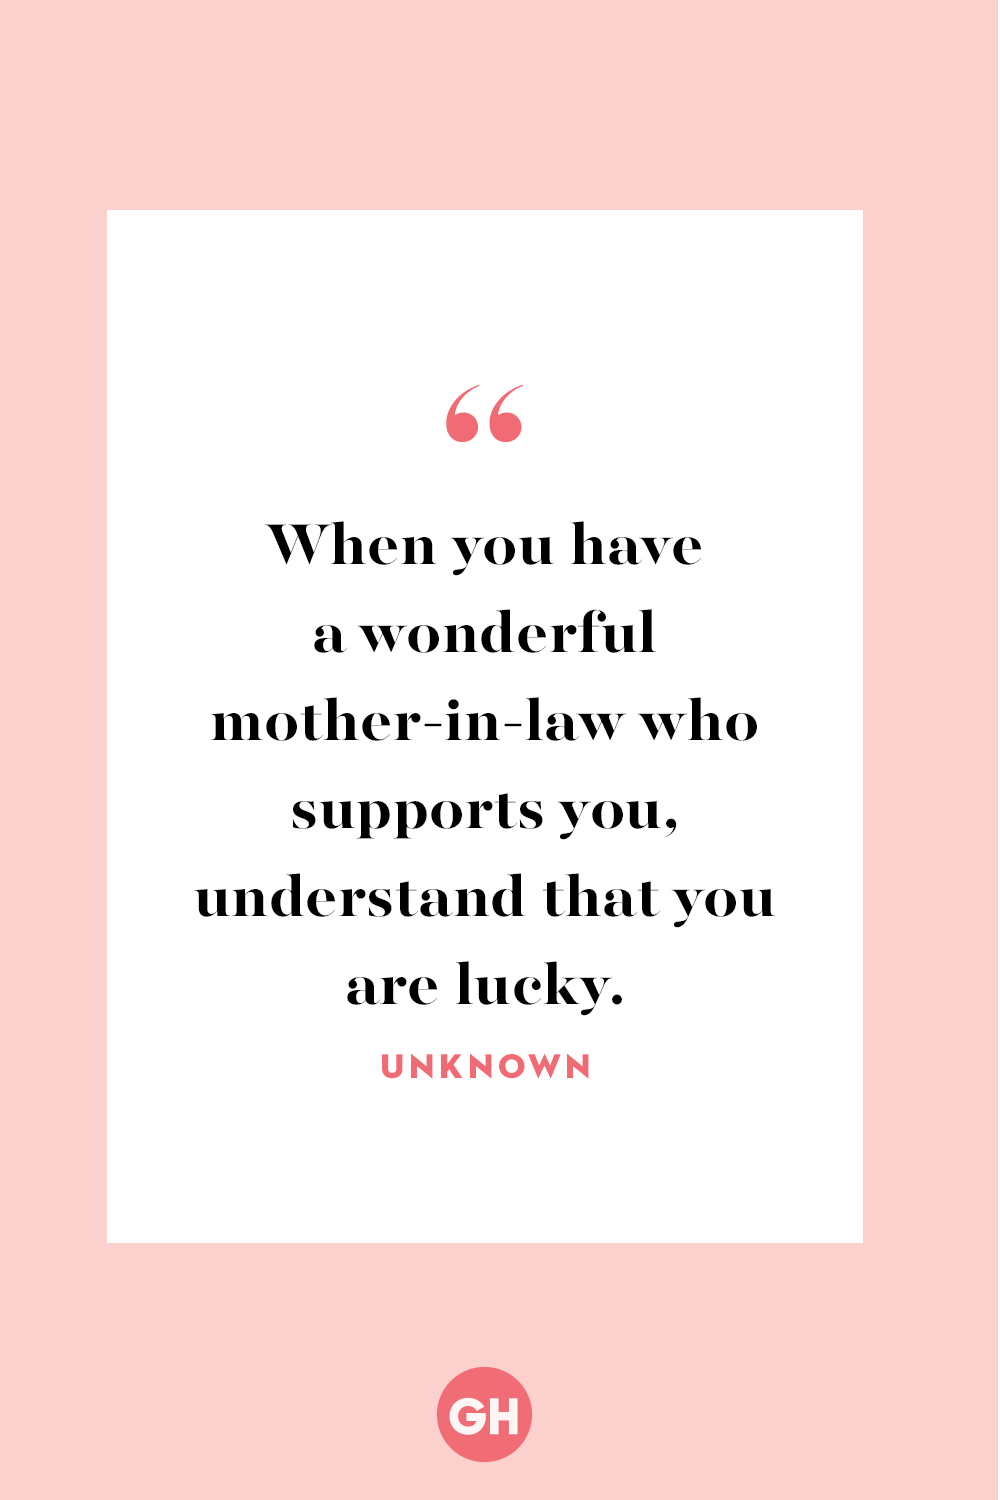 mother in law birthday quotes